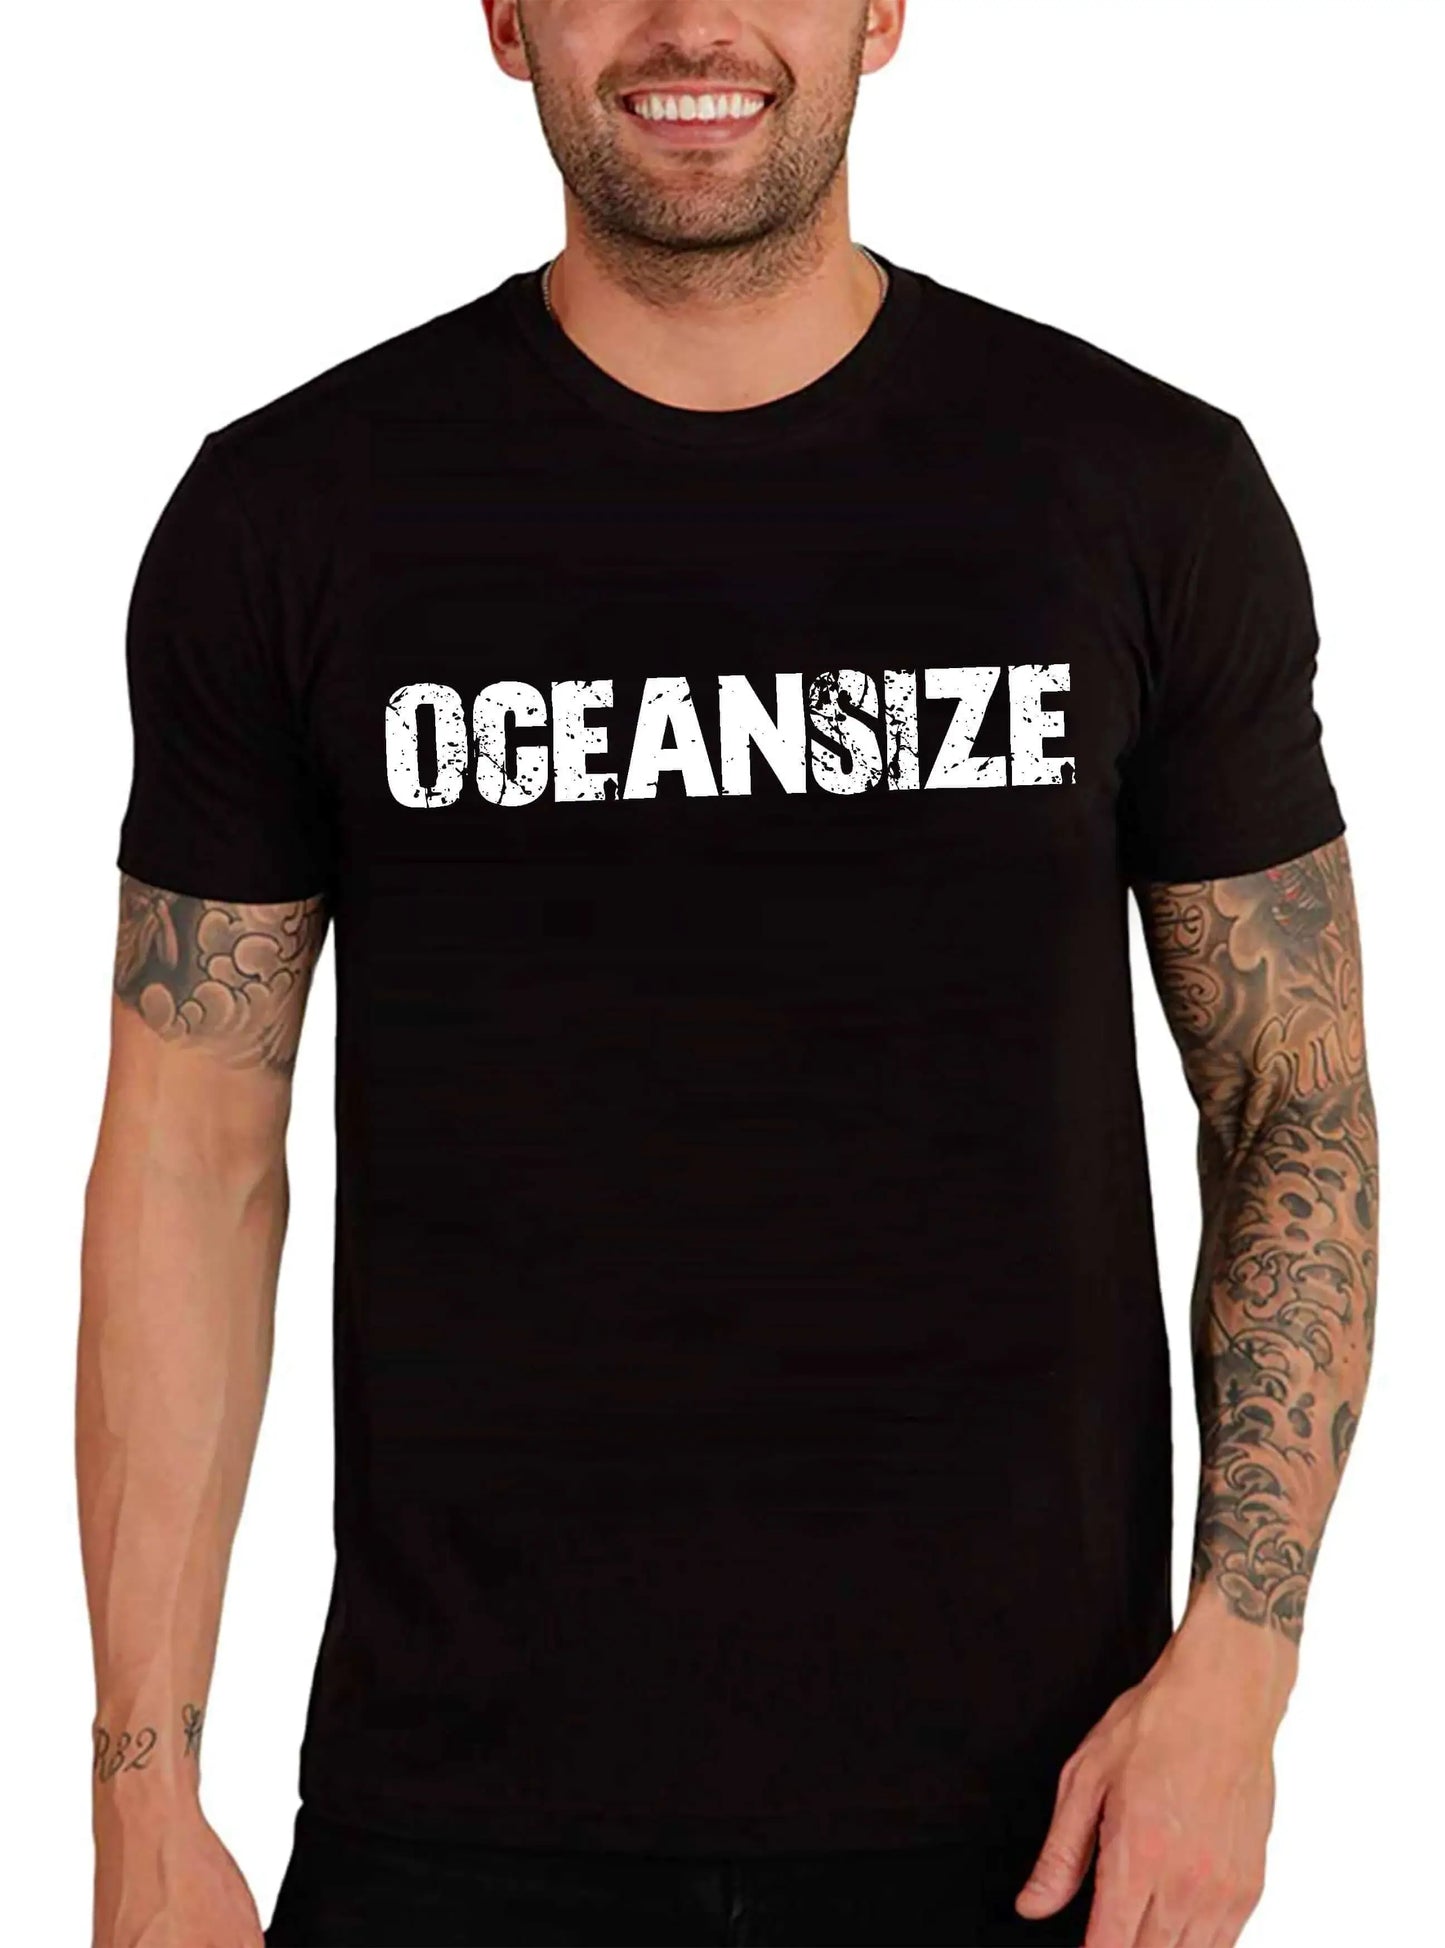 Men's Graphic T-Shirt Oceansize Eco-Friendly Limited Edition Short Sleeve Tee-Shirt Vintage Birthday Gift Novelty